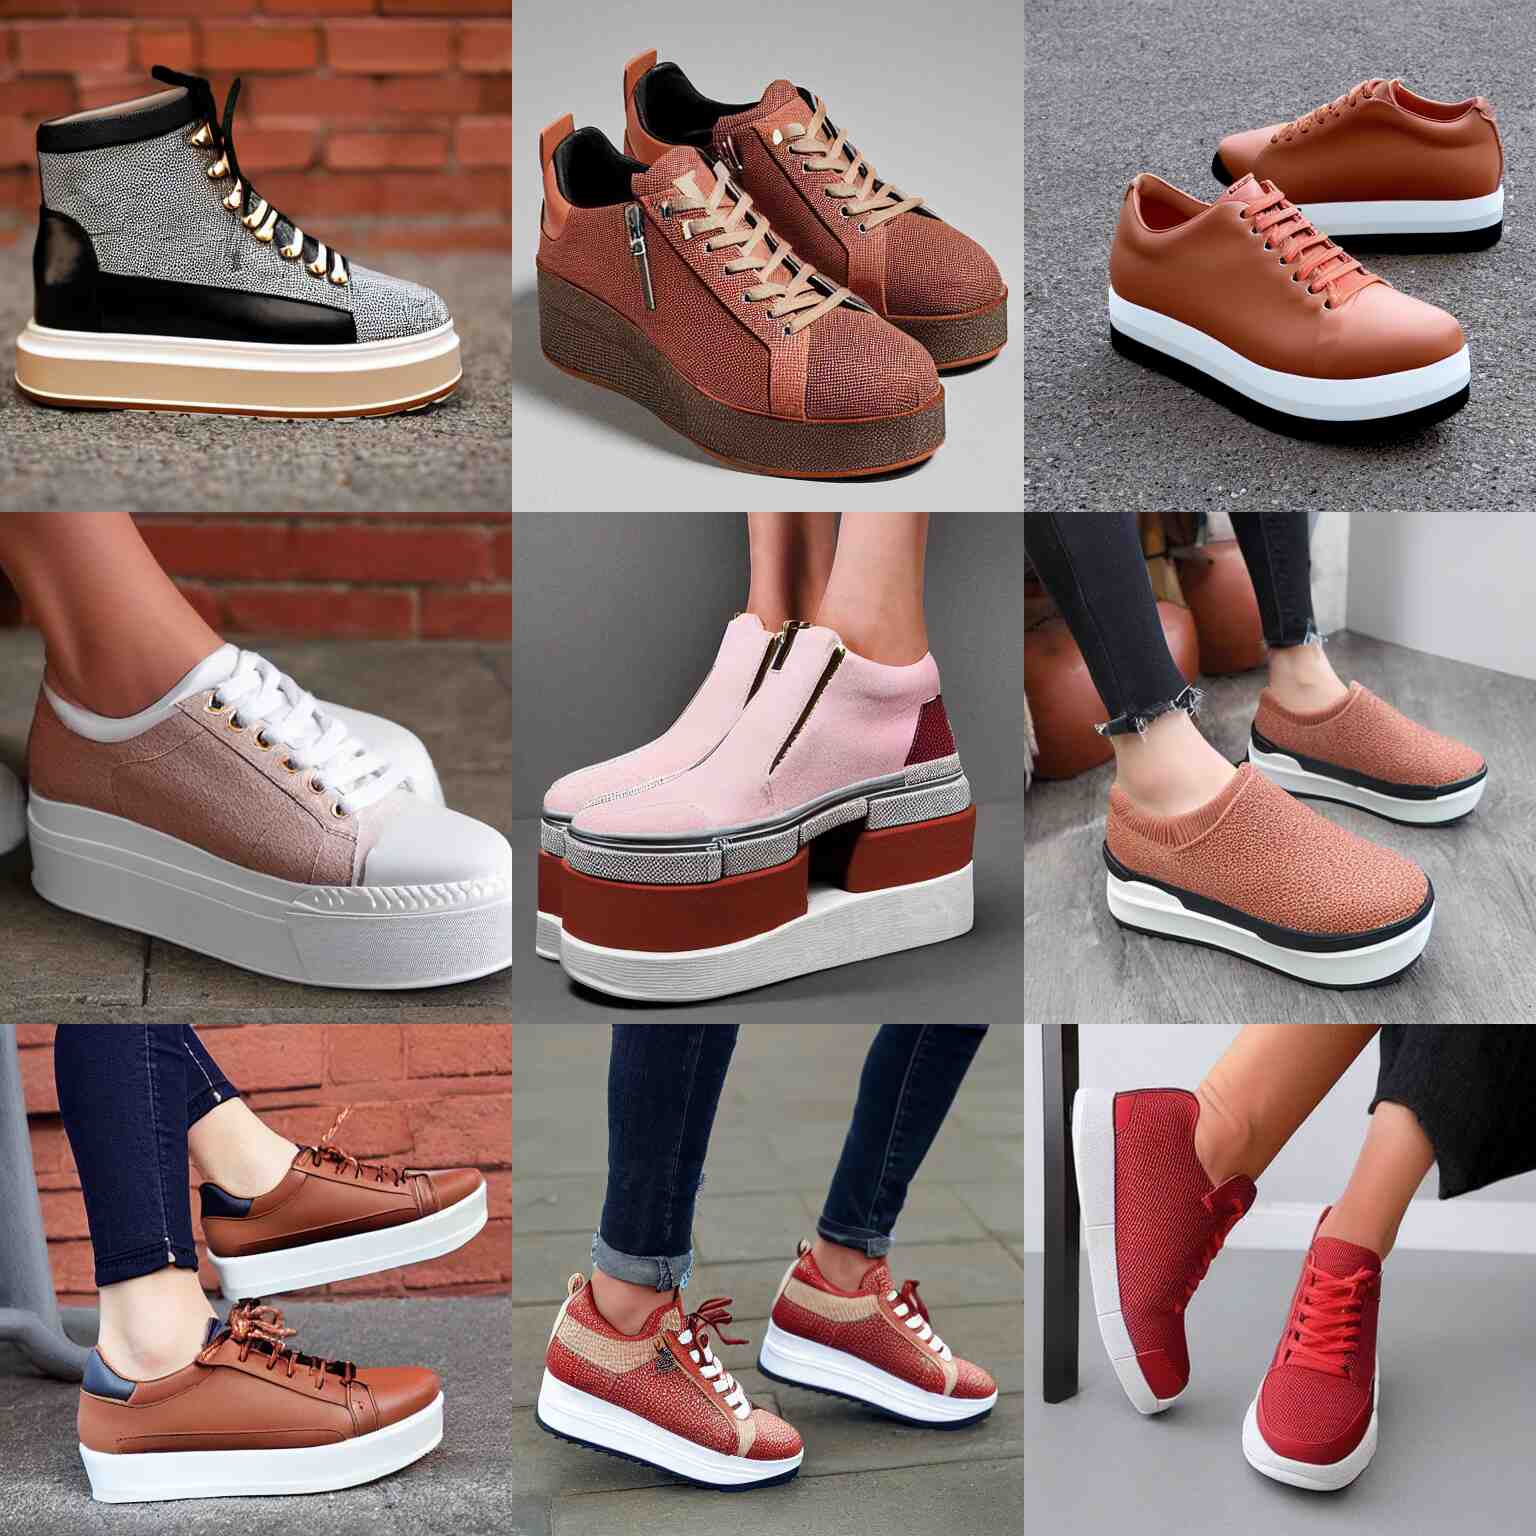 Platform sneakers made out of brick